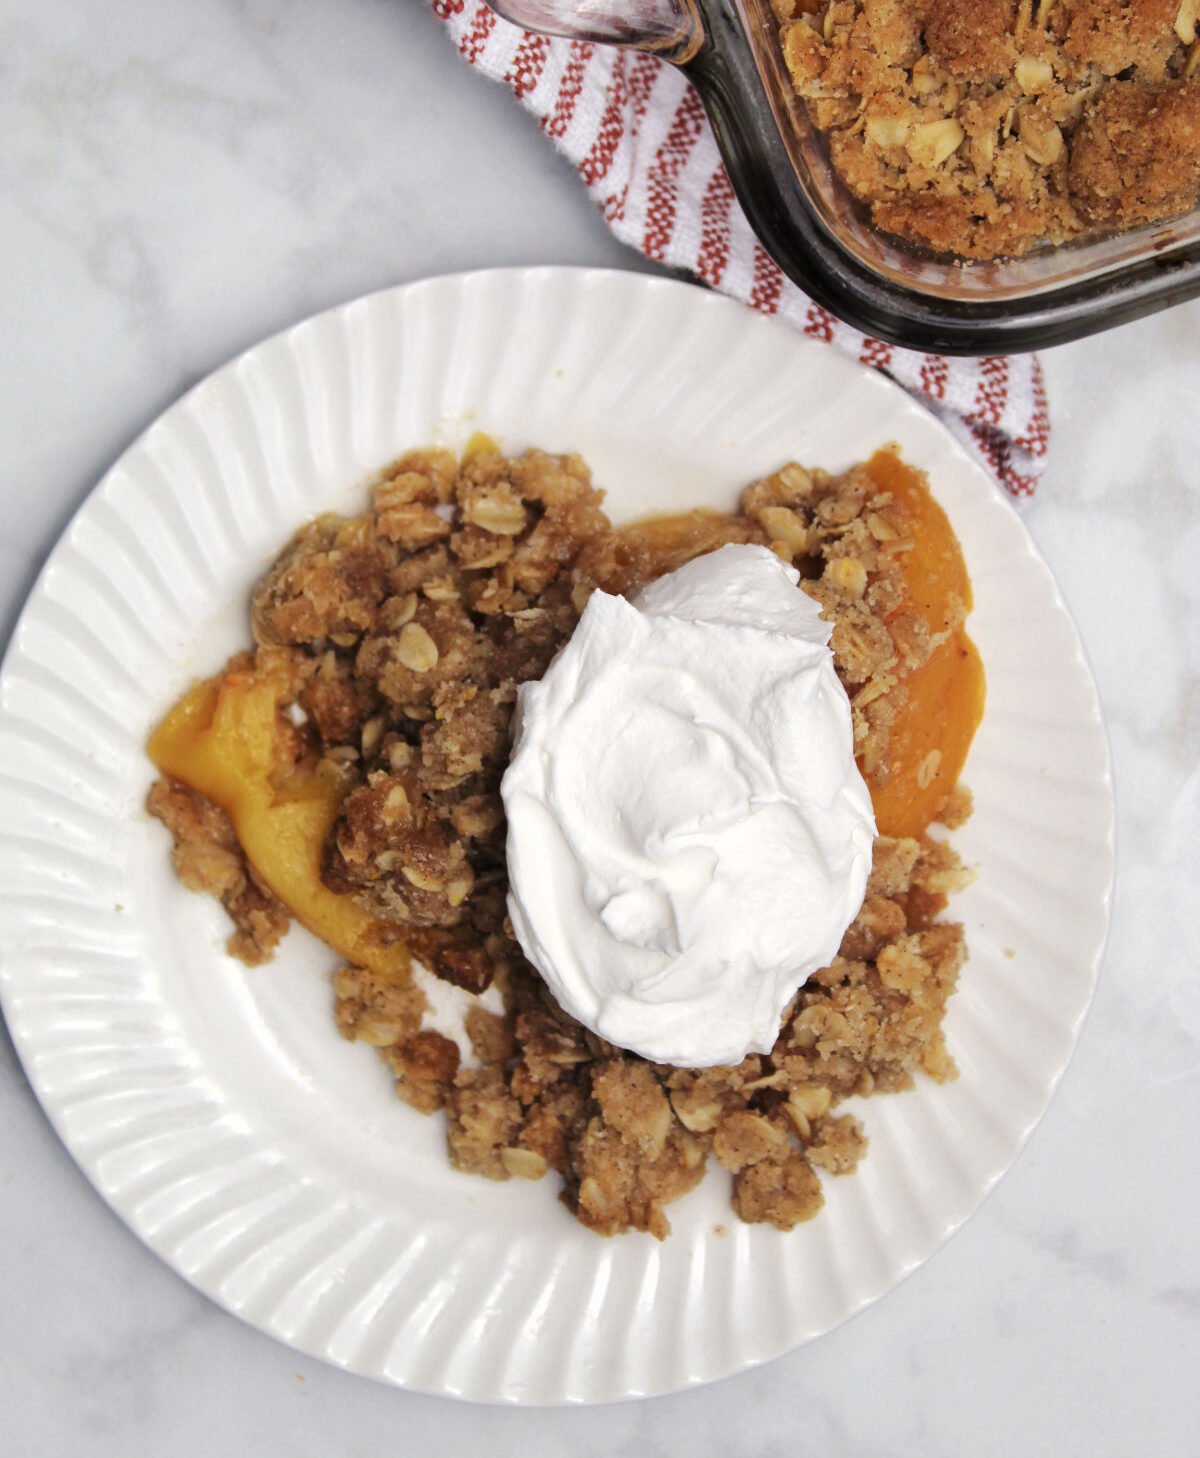 a serving of peach crisp with a dollop of whipped topping. behind the plate is part of the baking dish showing the peach crisp.